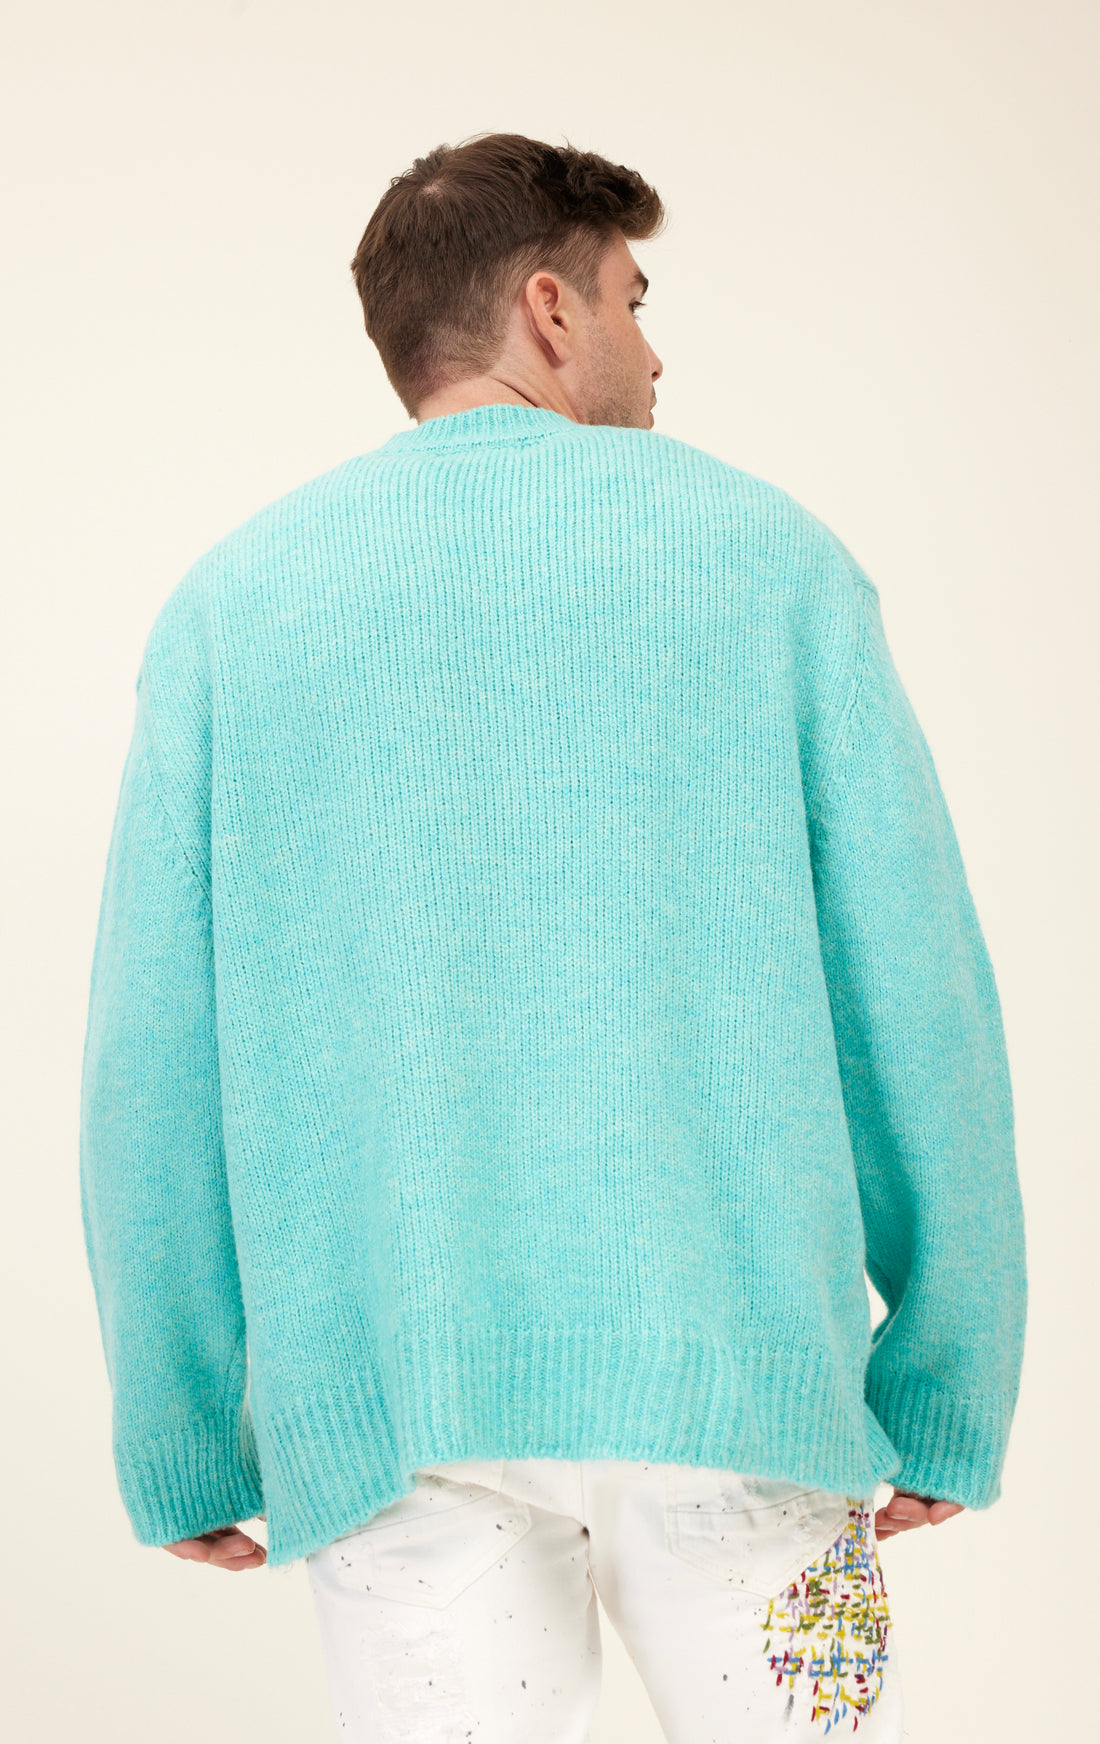 N° 9981  WOOL BLEND FLUFFY SWEATER - TURQUOISE